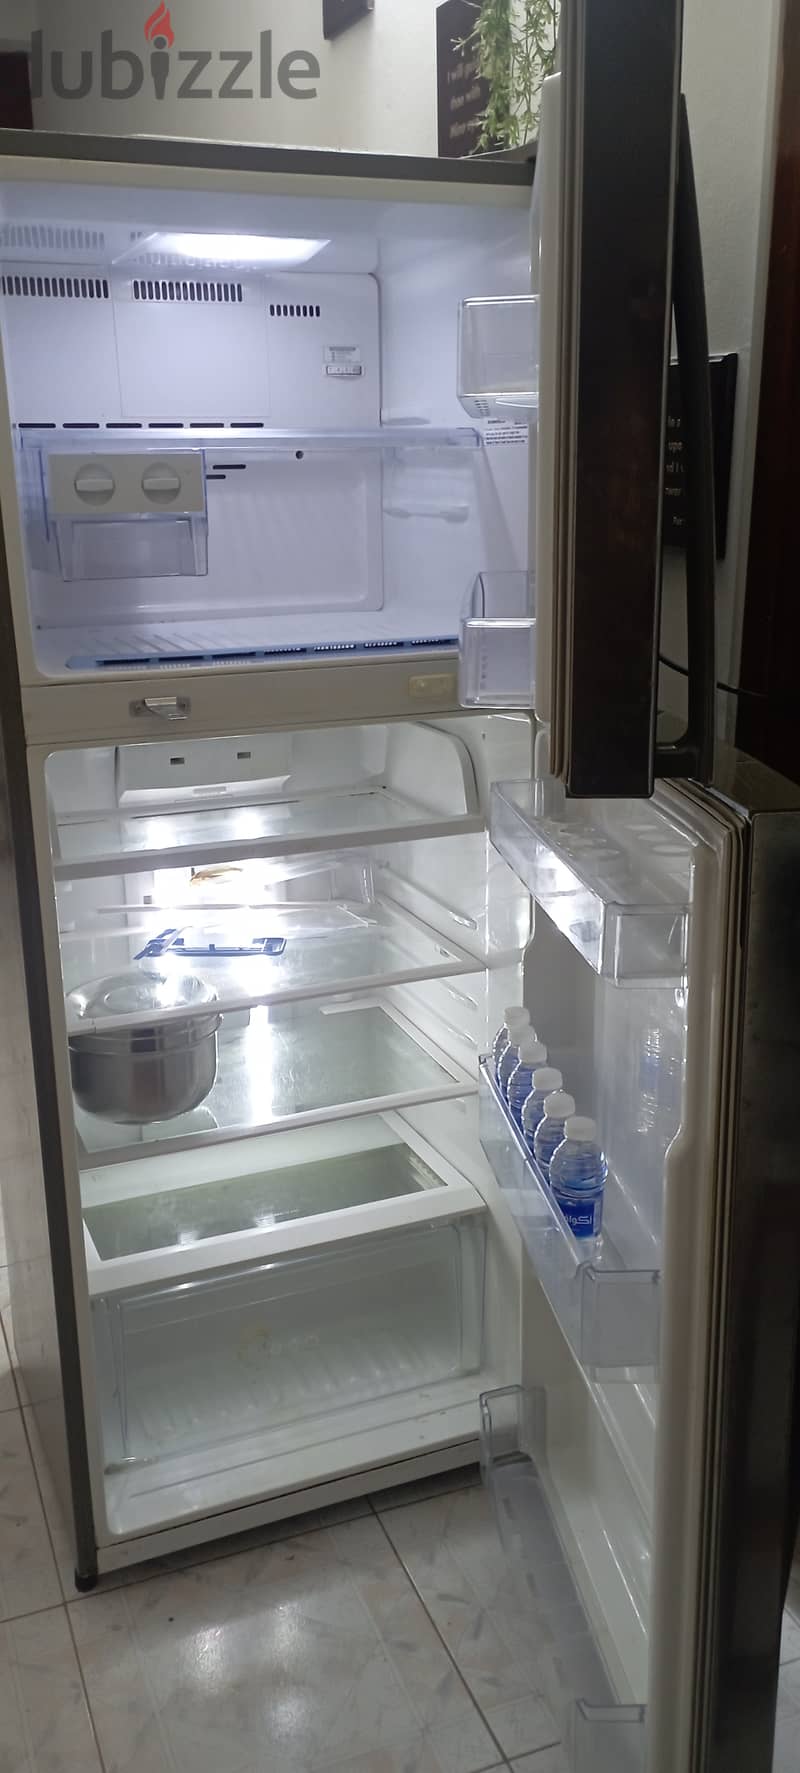 LG fridge 500 L for sale ( compressor not working, Other all is id co) 2